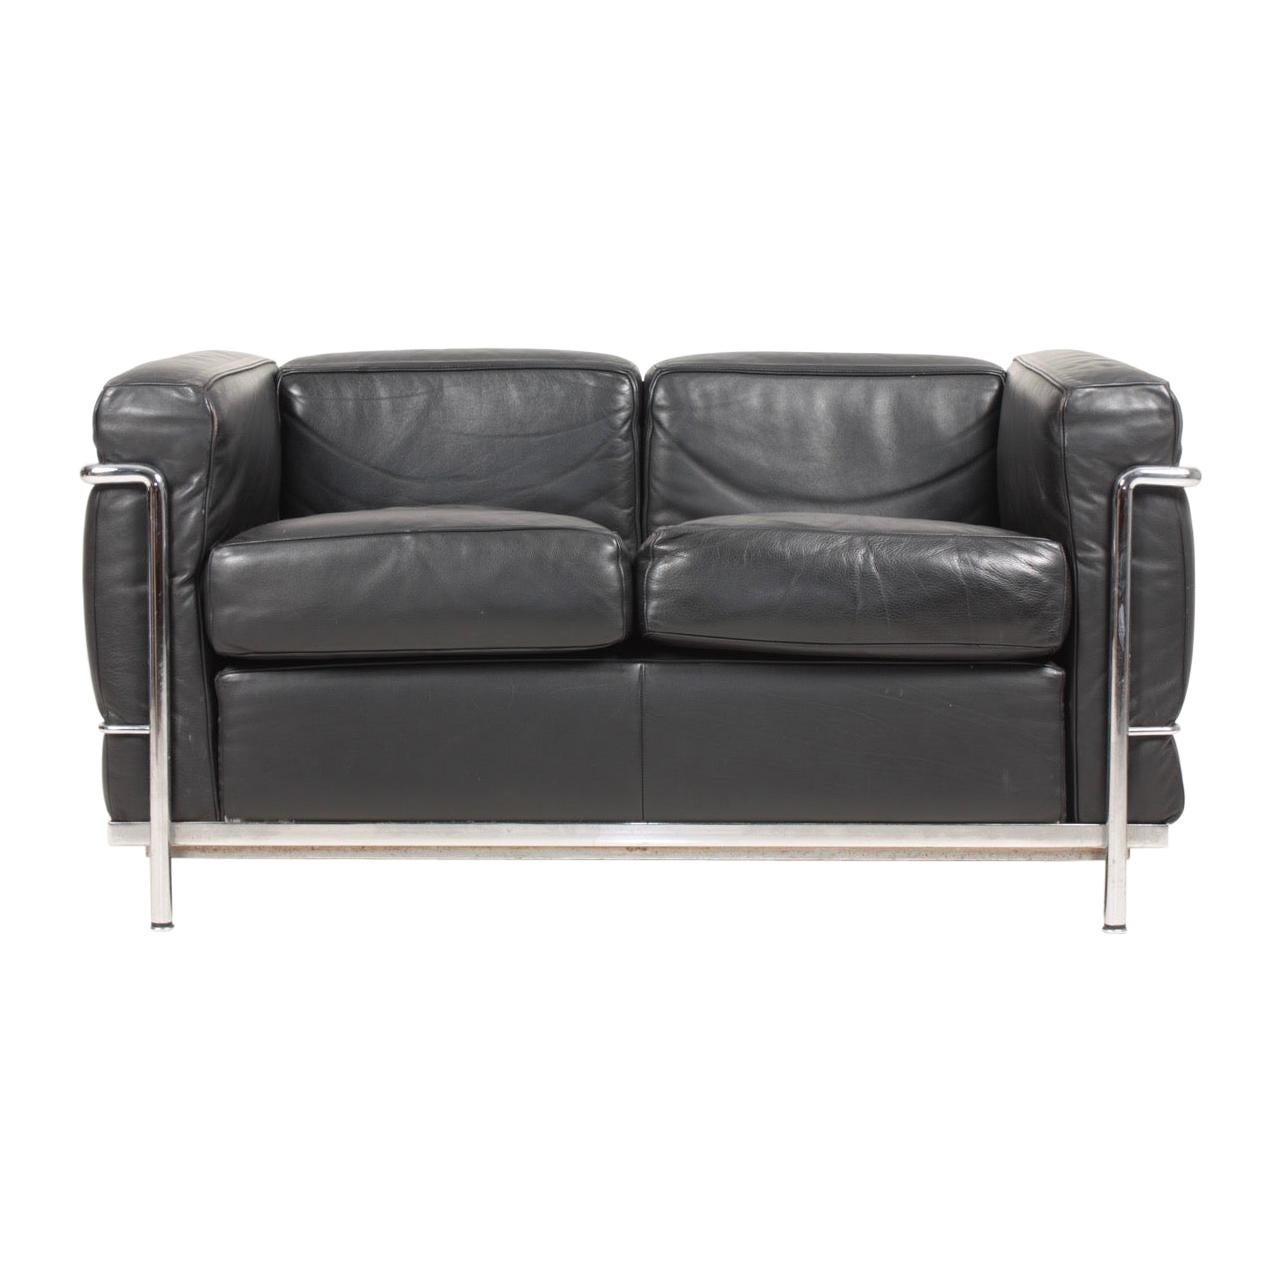 Original 'LC2' Sofa by Le Corbusier, Jeanneret & Perriand for Cassina